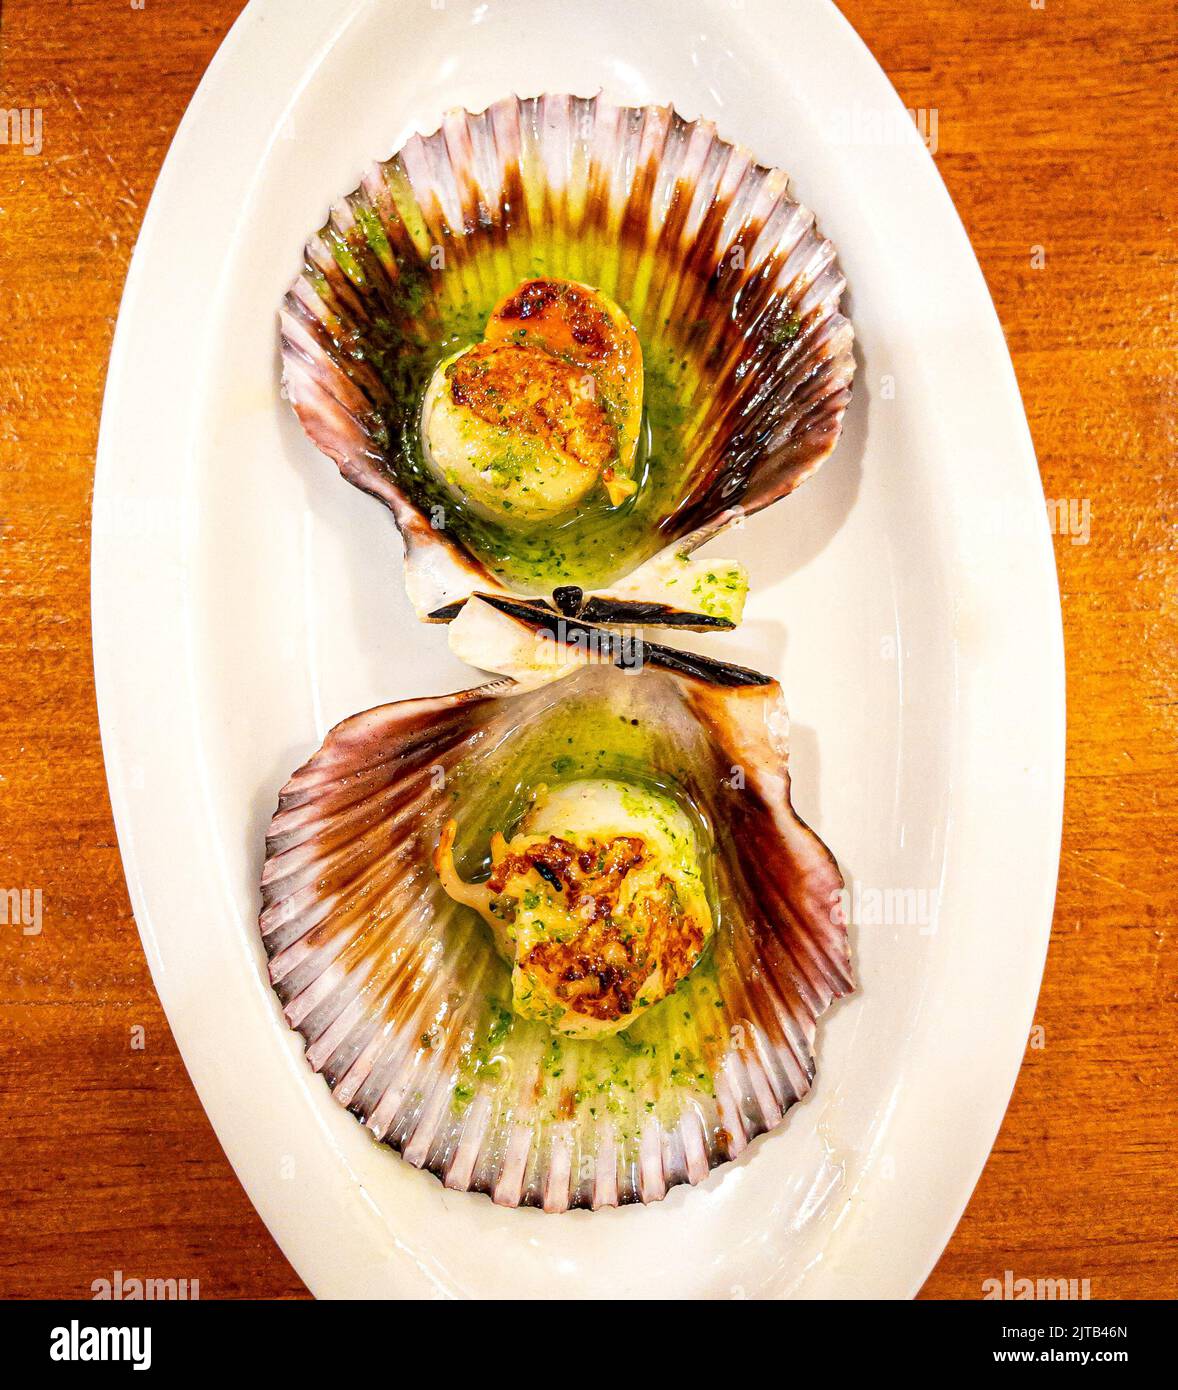 Pintxo of grilled scallops on the grill, seasoned with parsley oil. San Sebastian cuisine. Stock Photo